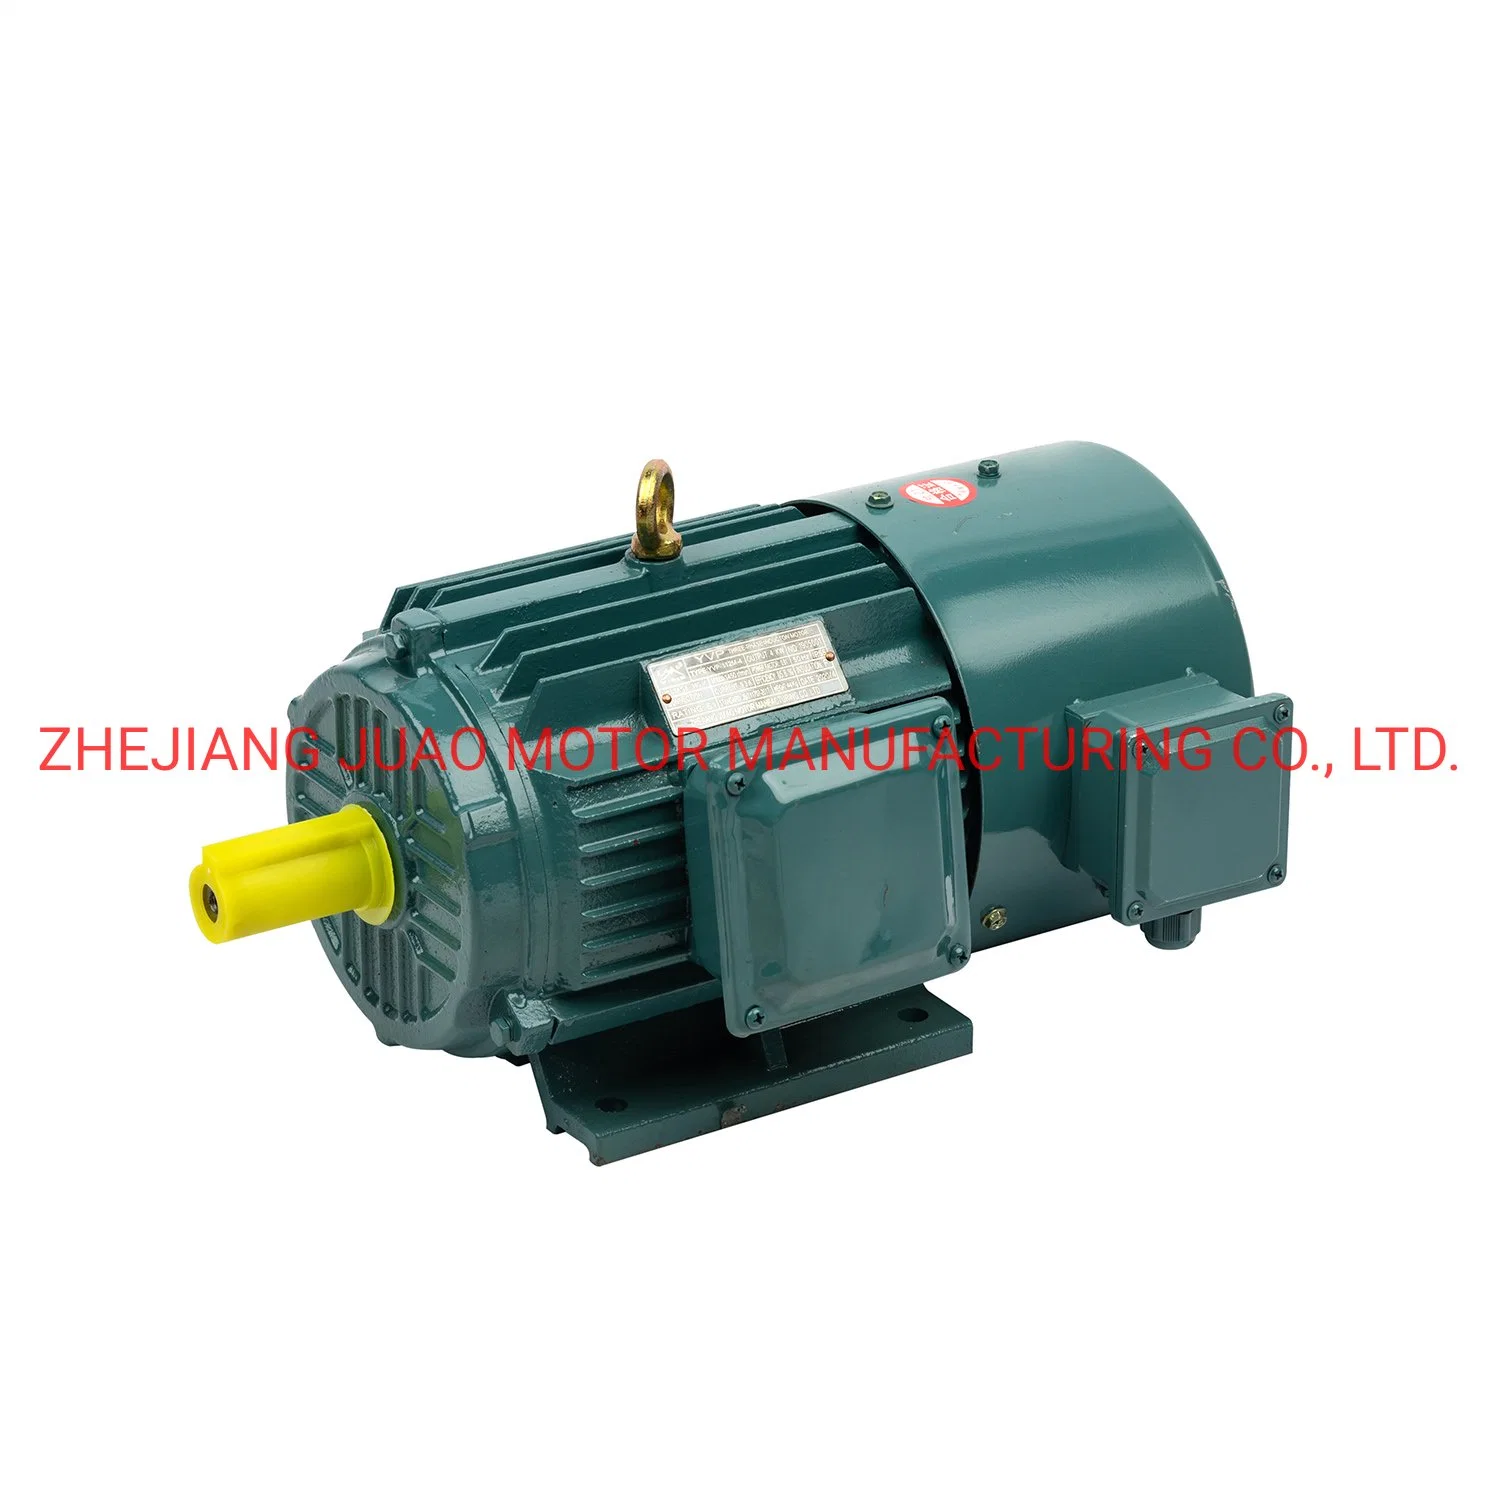 Chinese Capacitor Run Three Phase AC Asynchronous Induction Electric Electrical Motor Factory Manufacturer (5-50Hz)